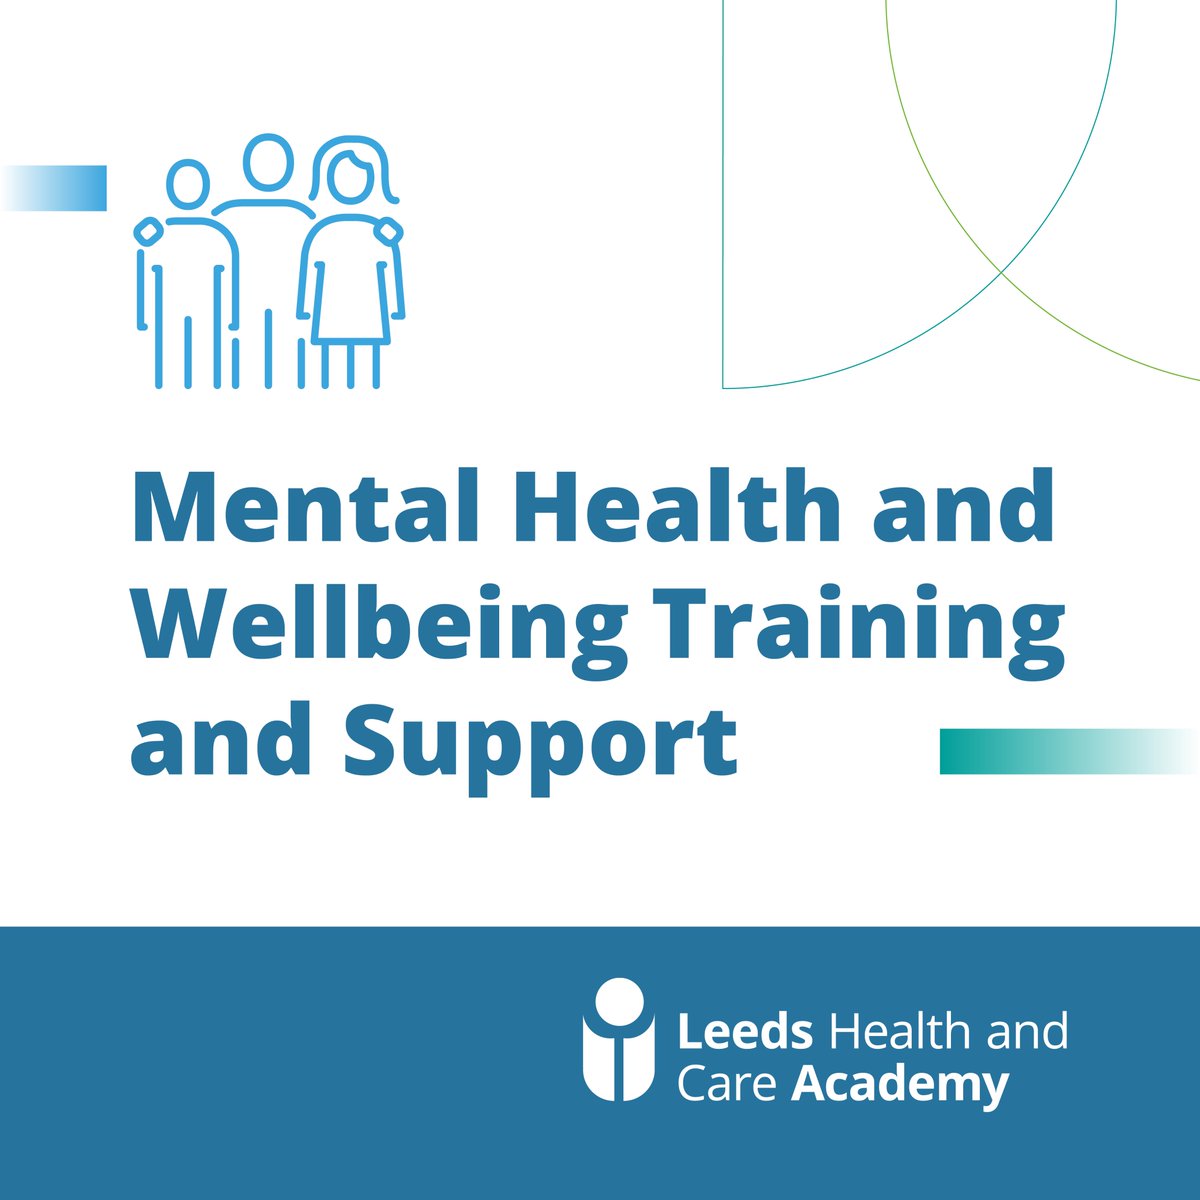 As #StressAwarenessMonth comes to an end, we share a reminder that there are a number of free mental health & wellbeing initiatives available for the health & care workforce in Leeds, that allow space to show kindness compassion to yourself & others: leedshealthandcareacademy.org/learning/core-…